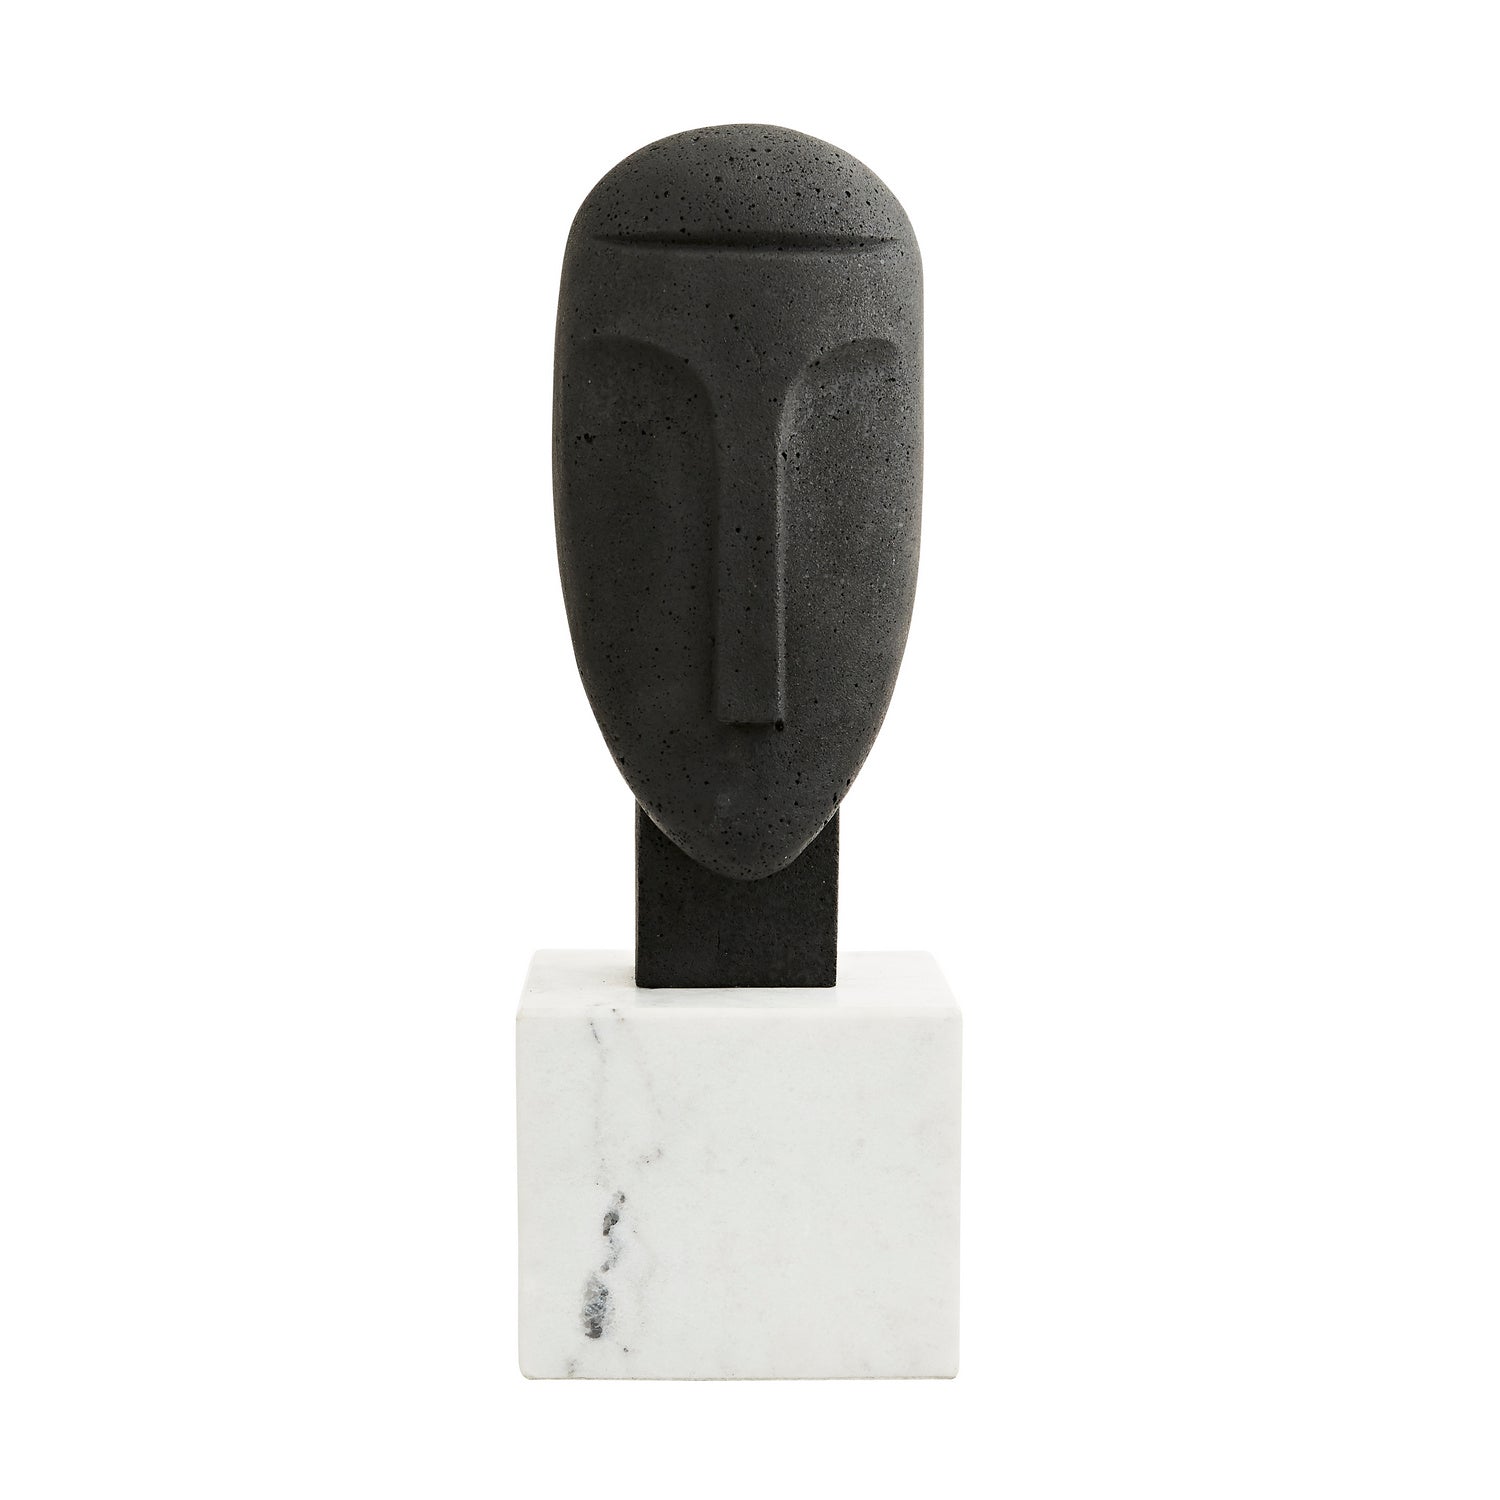 Sculpture from the Isa collection in Black finish